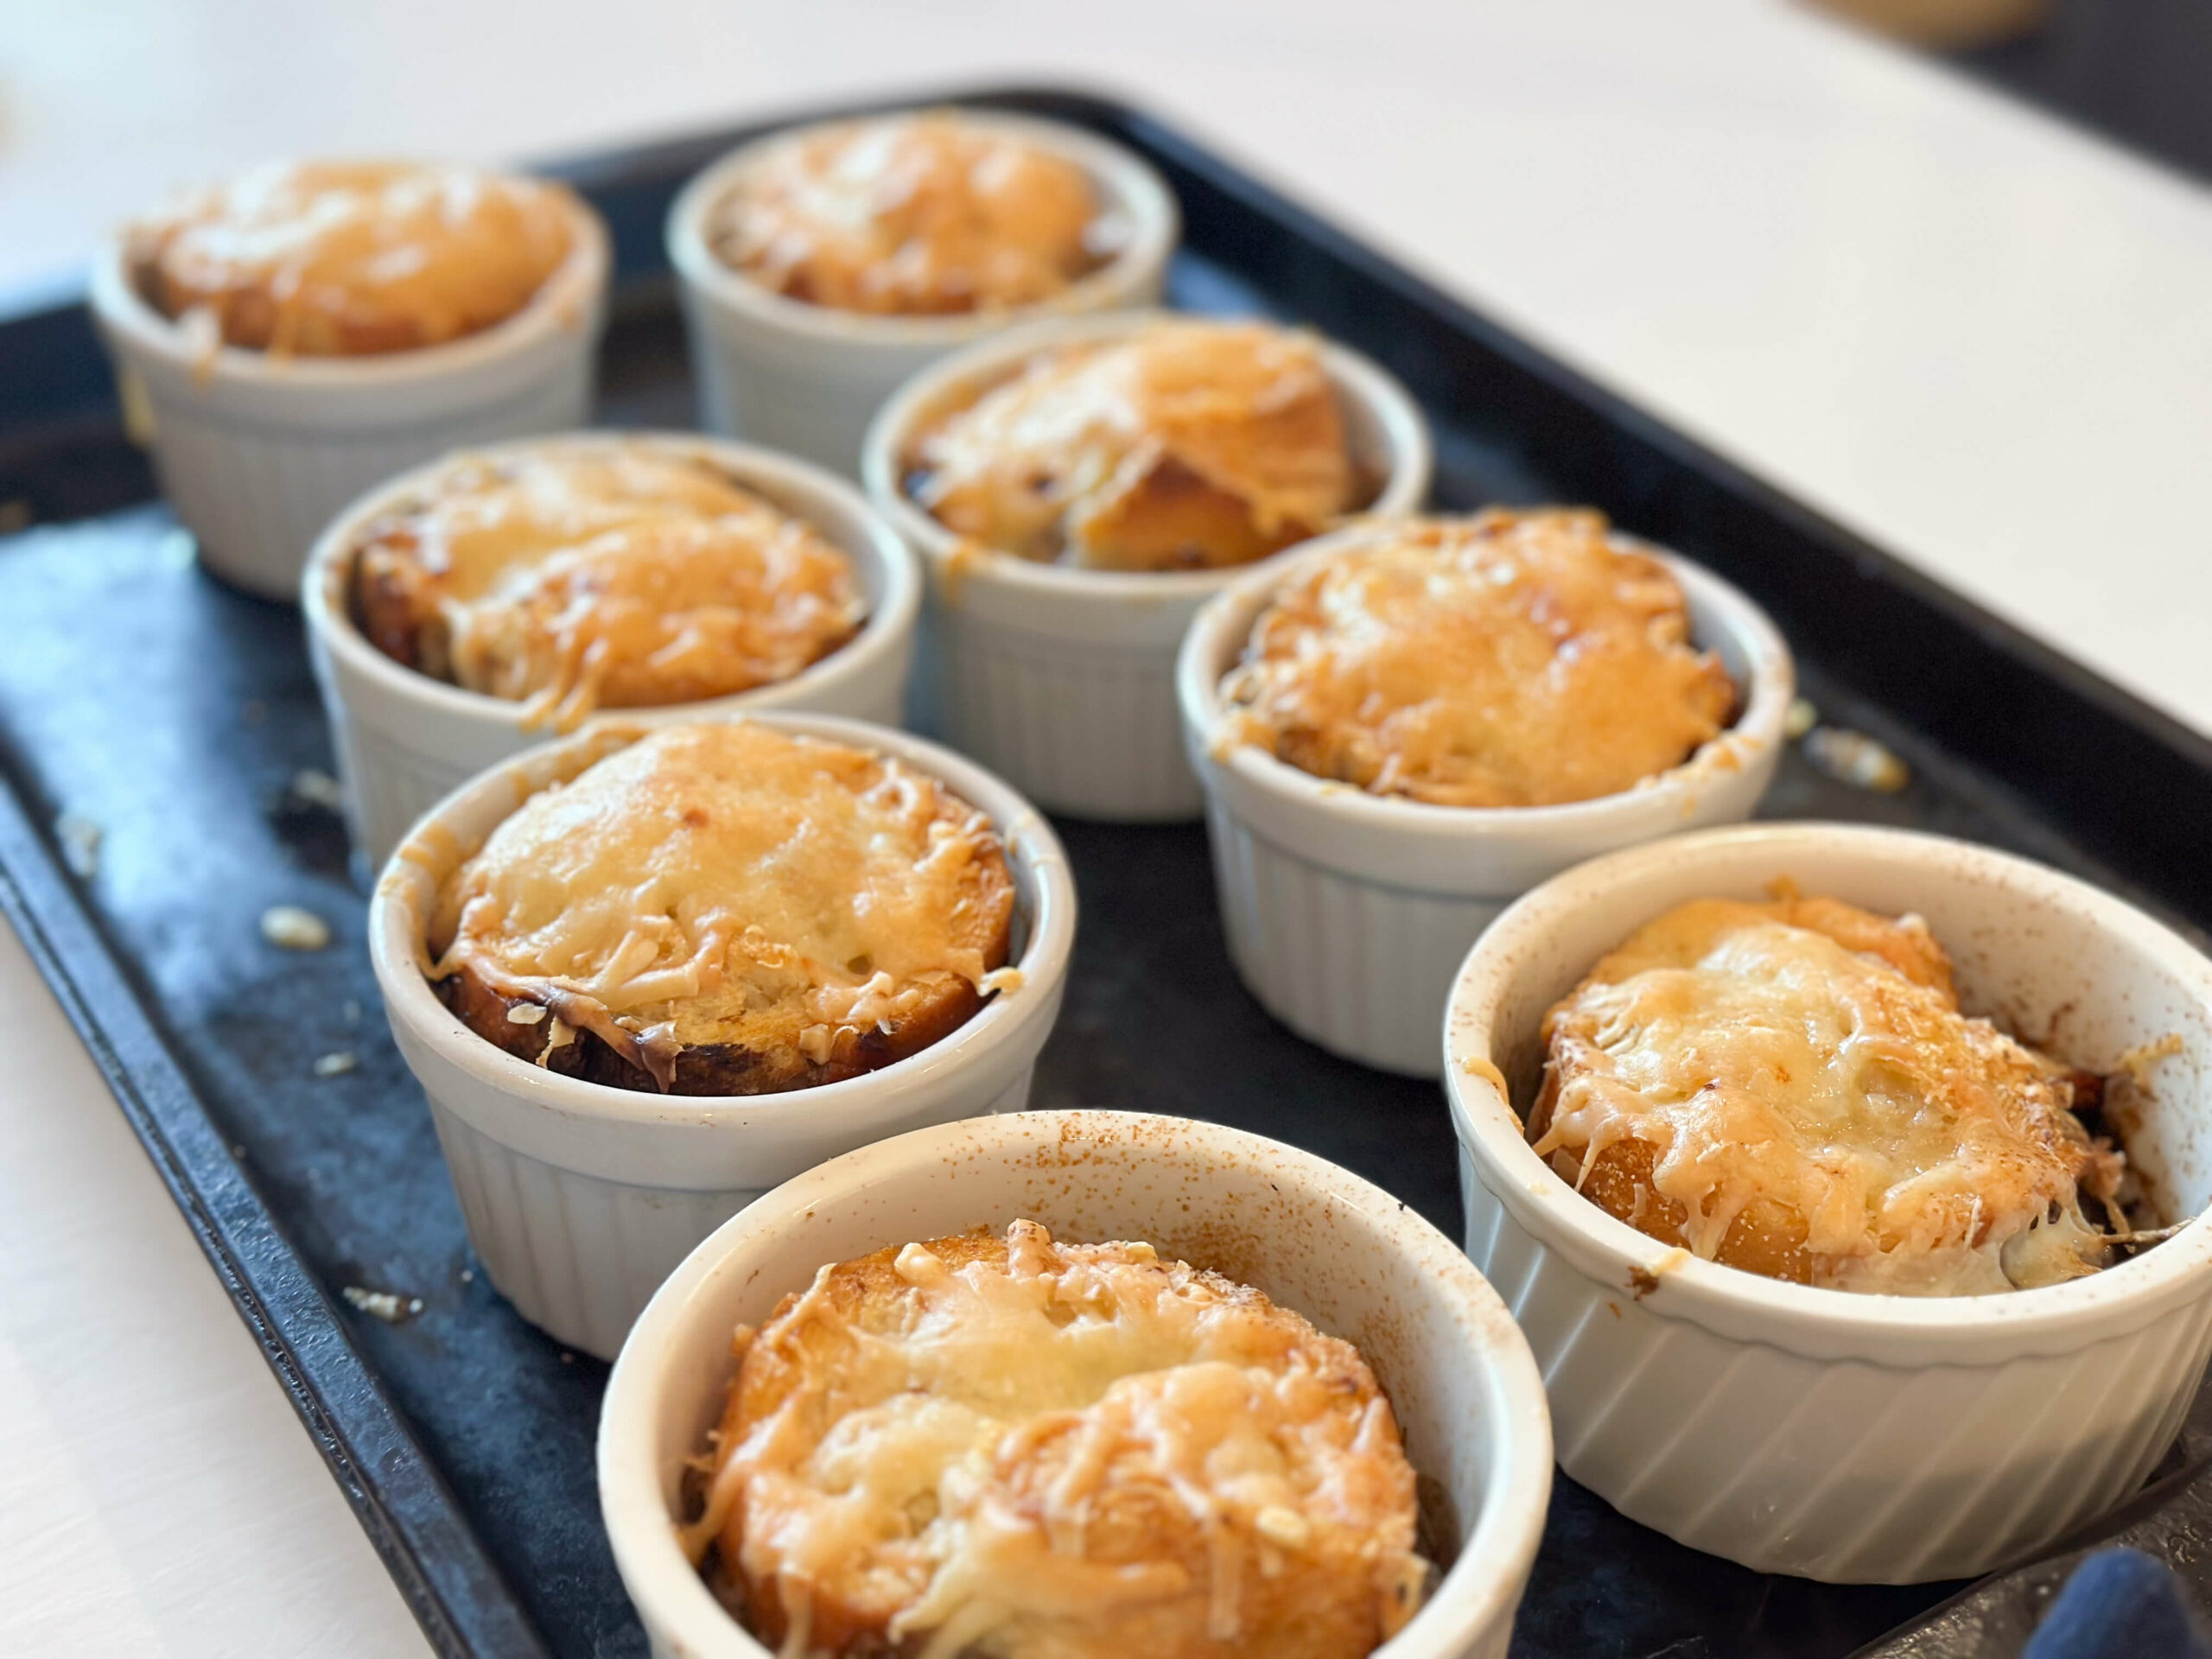 ramequins baked until cheese is melted and golden on top